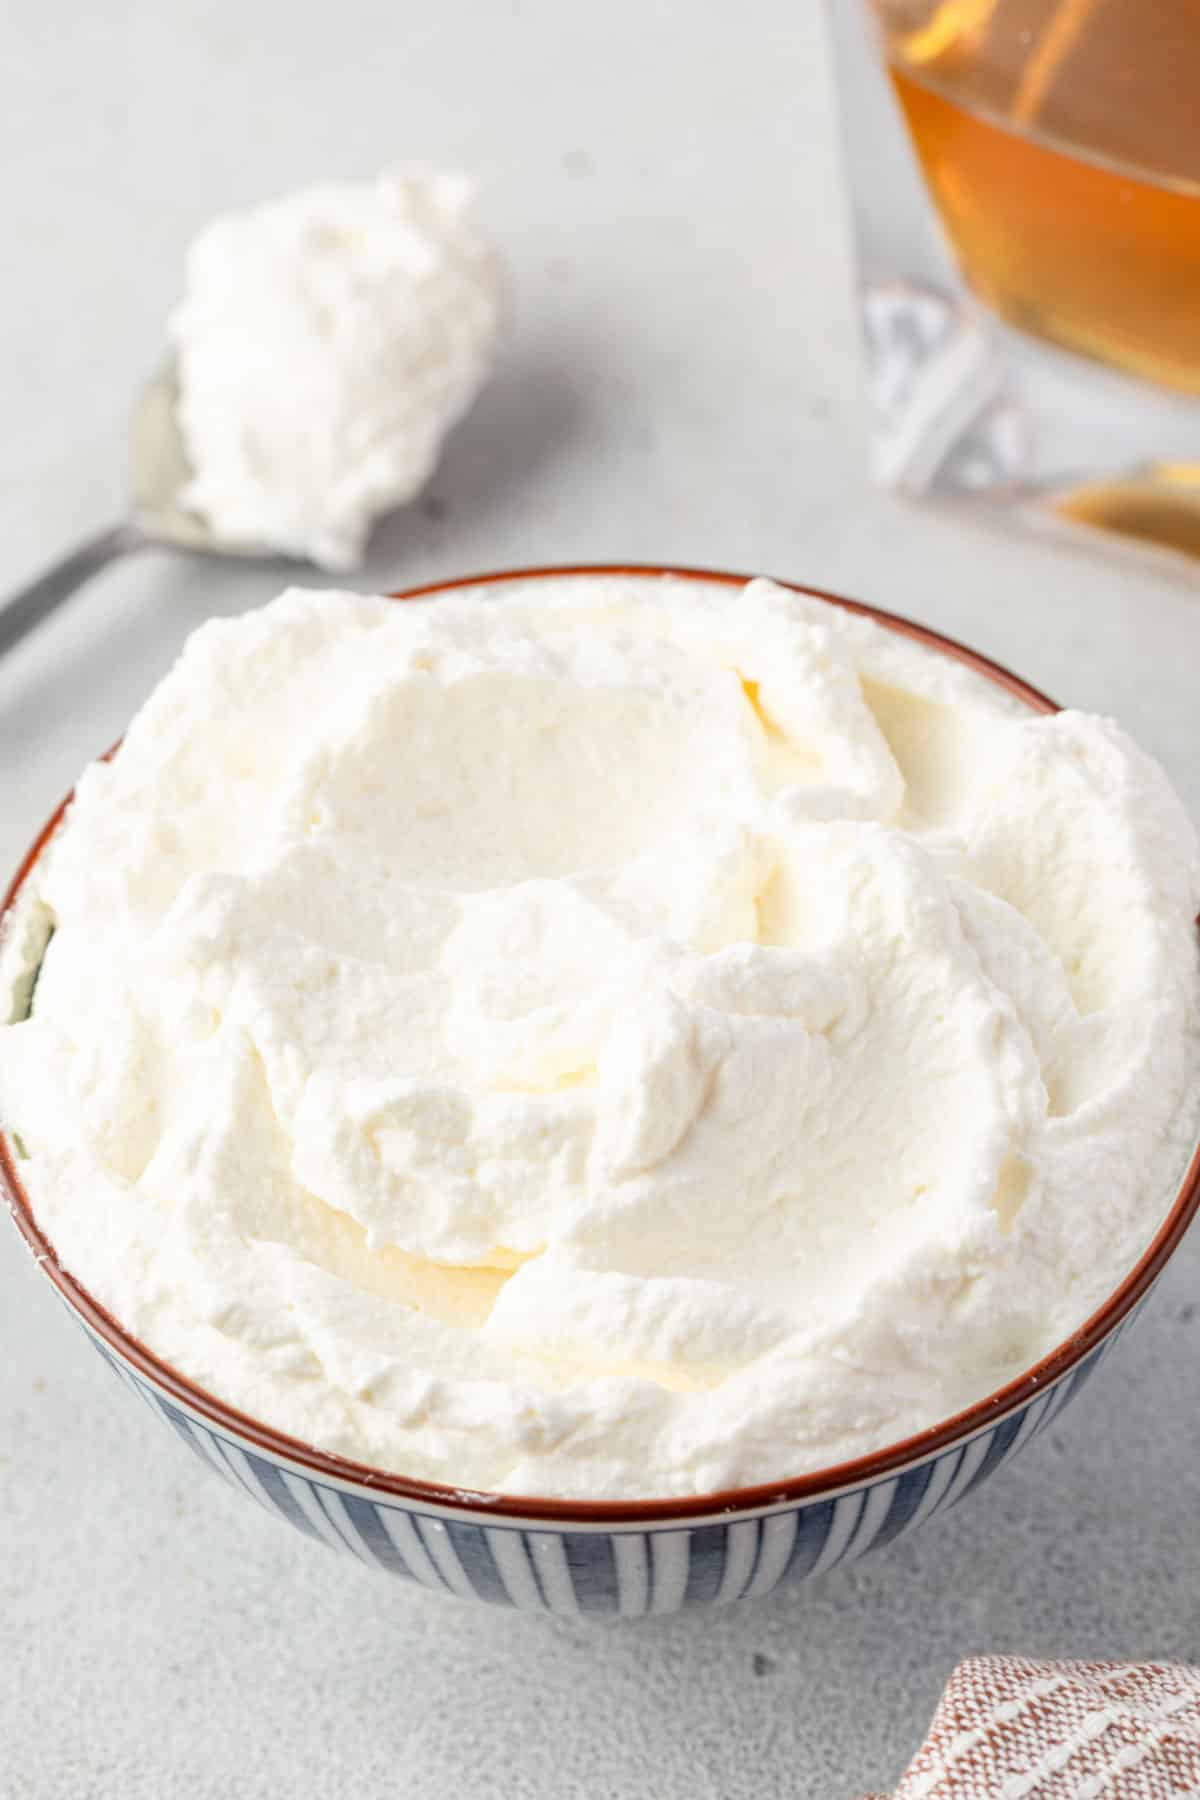 A bowl of whipped cream with divots in it showing that it is firm yet fluffy.